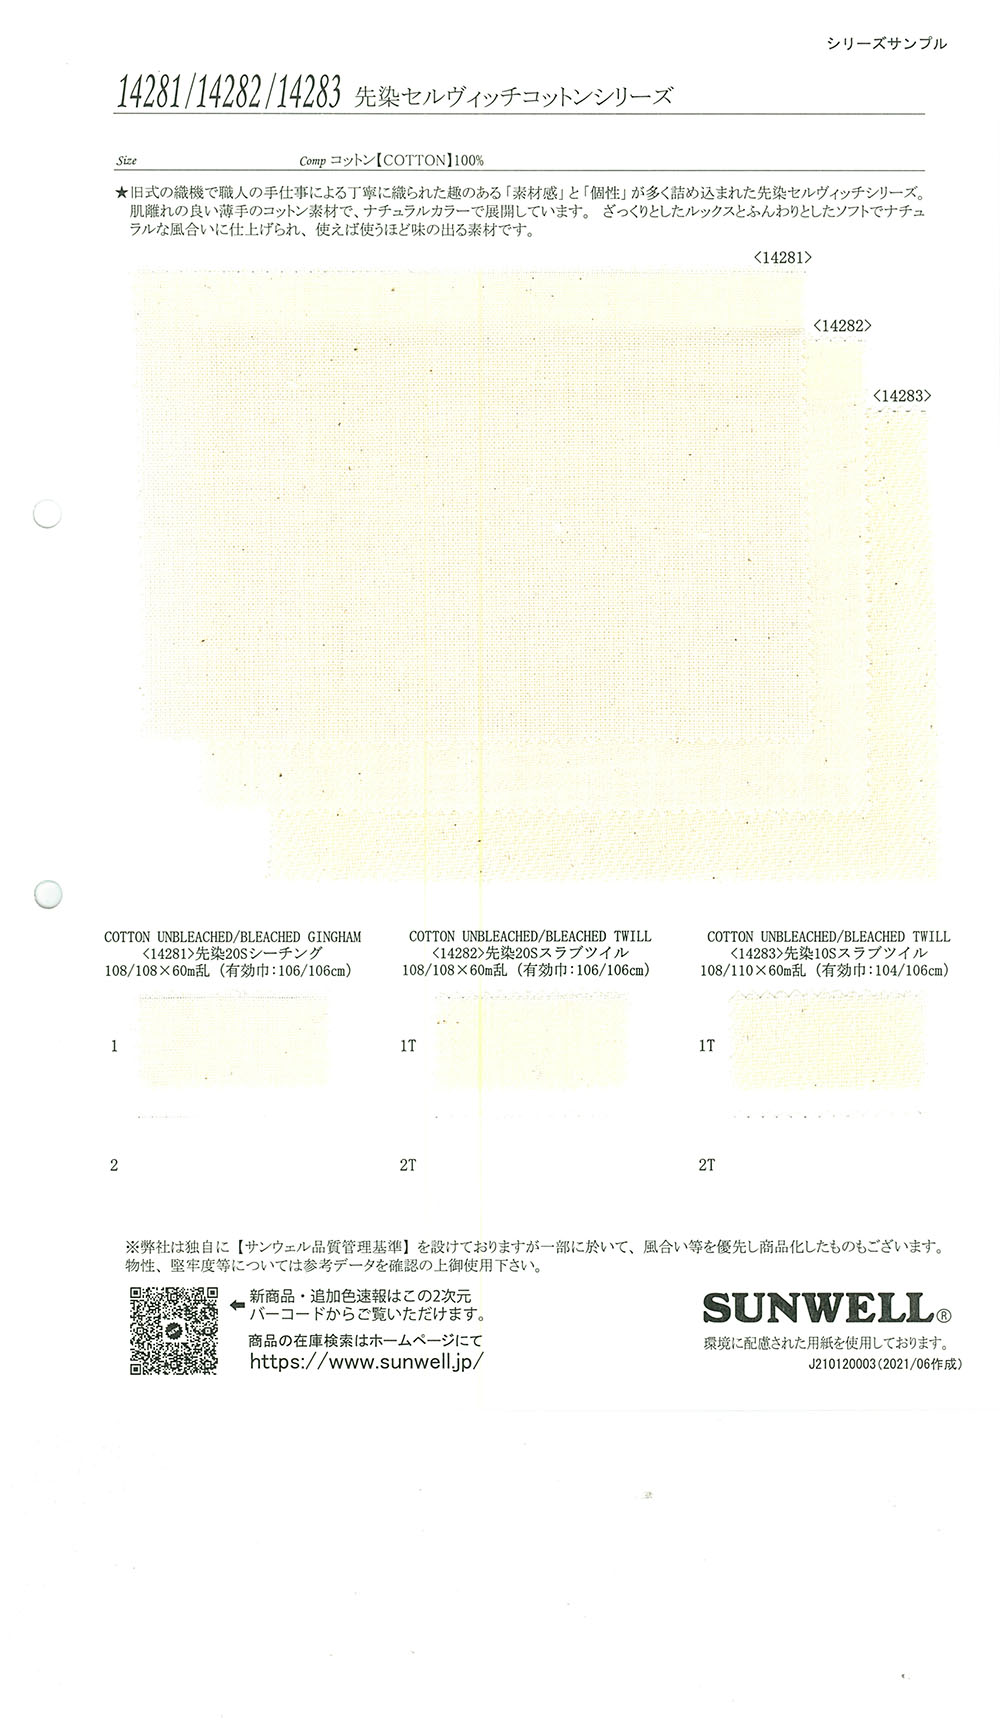 14281 Selvage Cotton Series Yarn Dyed 20 Single Thread Loomstate[Fabrication De Textile] SUNWELL